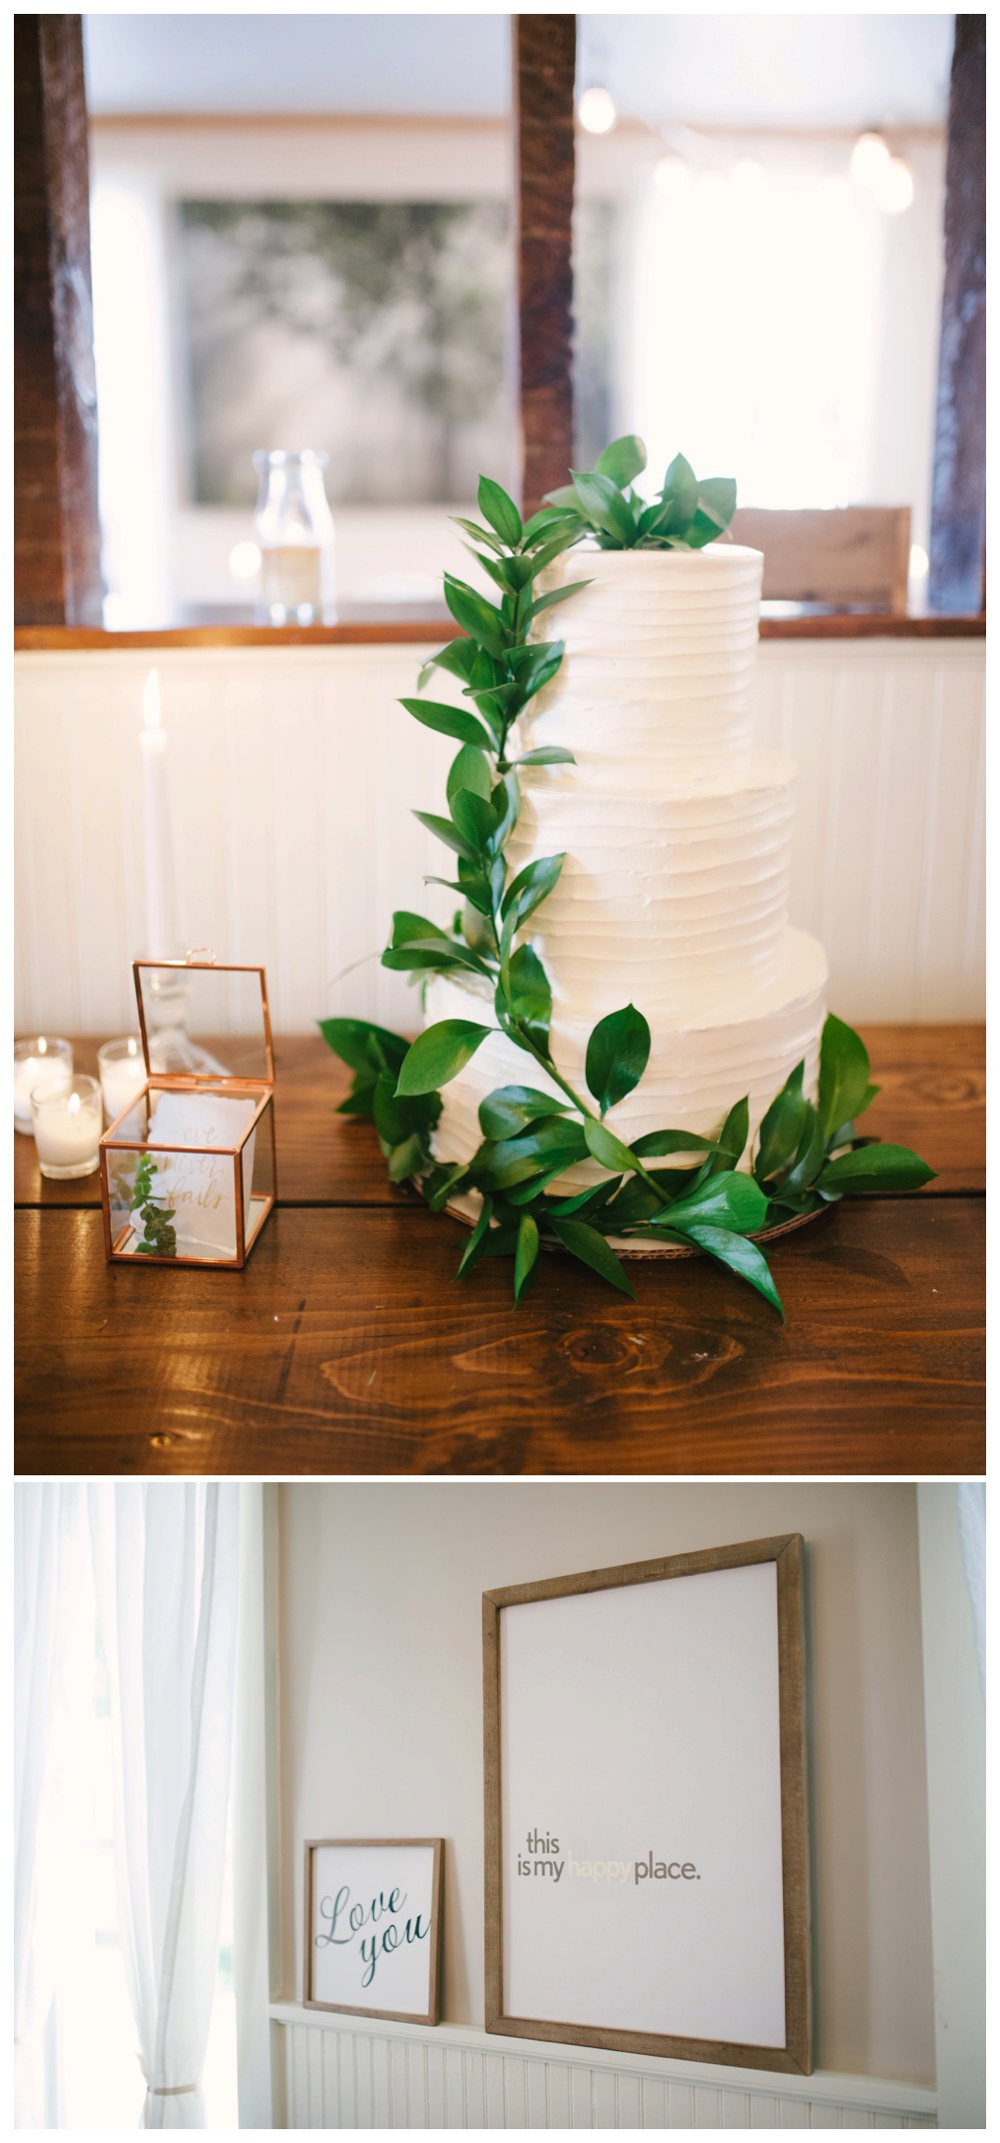 Little Lights Events, Tip Top Cakes, Hy-Vee, Brides by Jessa, and Andi's Invites_0019